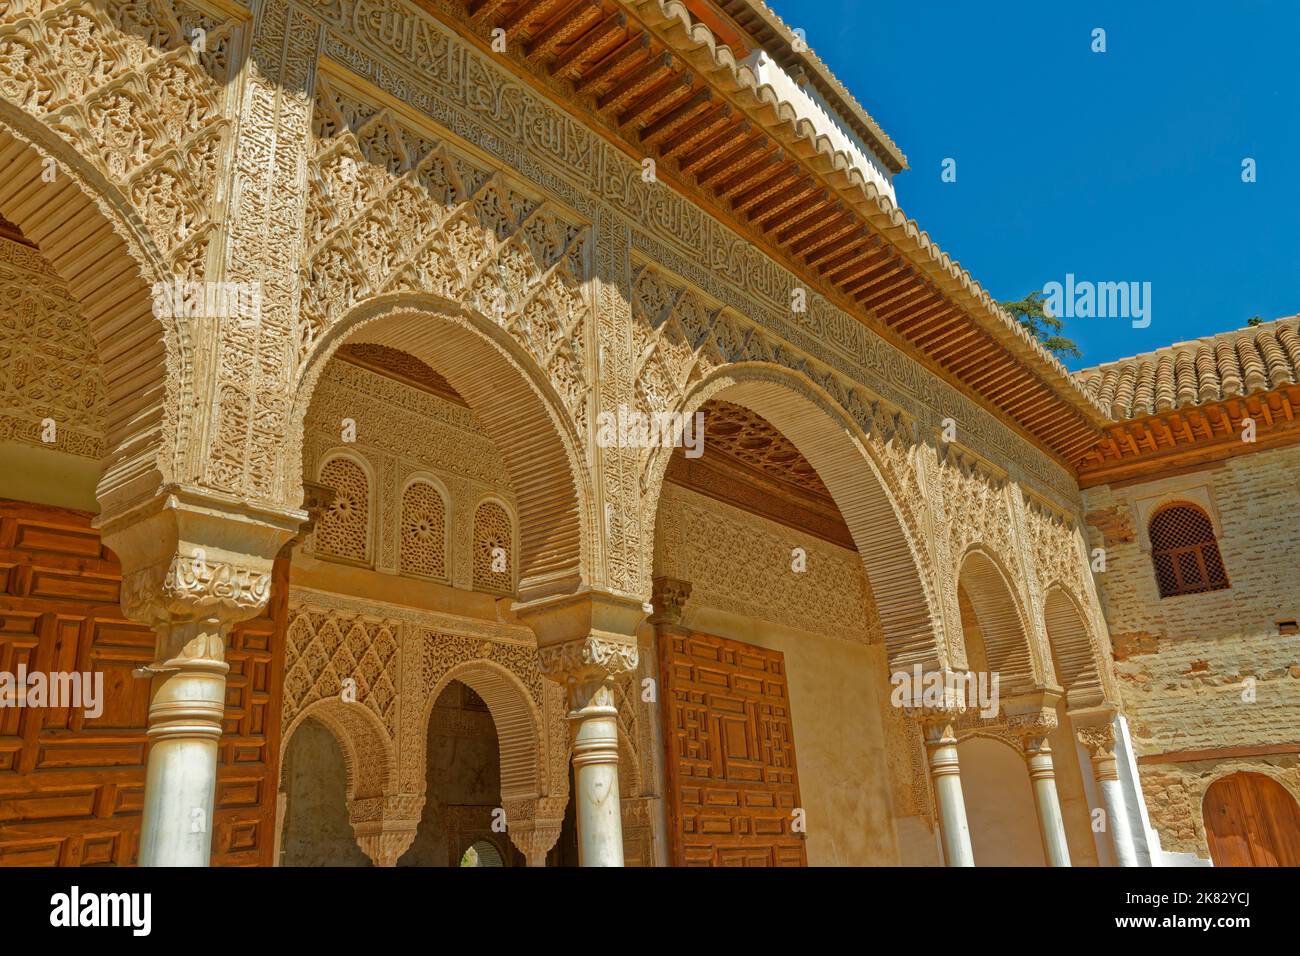 Architectural detail of the Palace buildings at the Generalife Gardens at the Alhambra palace complex at Granada, Spain. Stock Photo